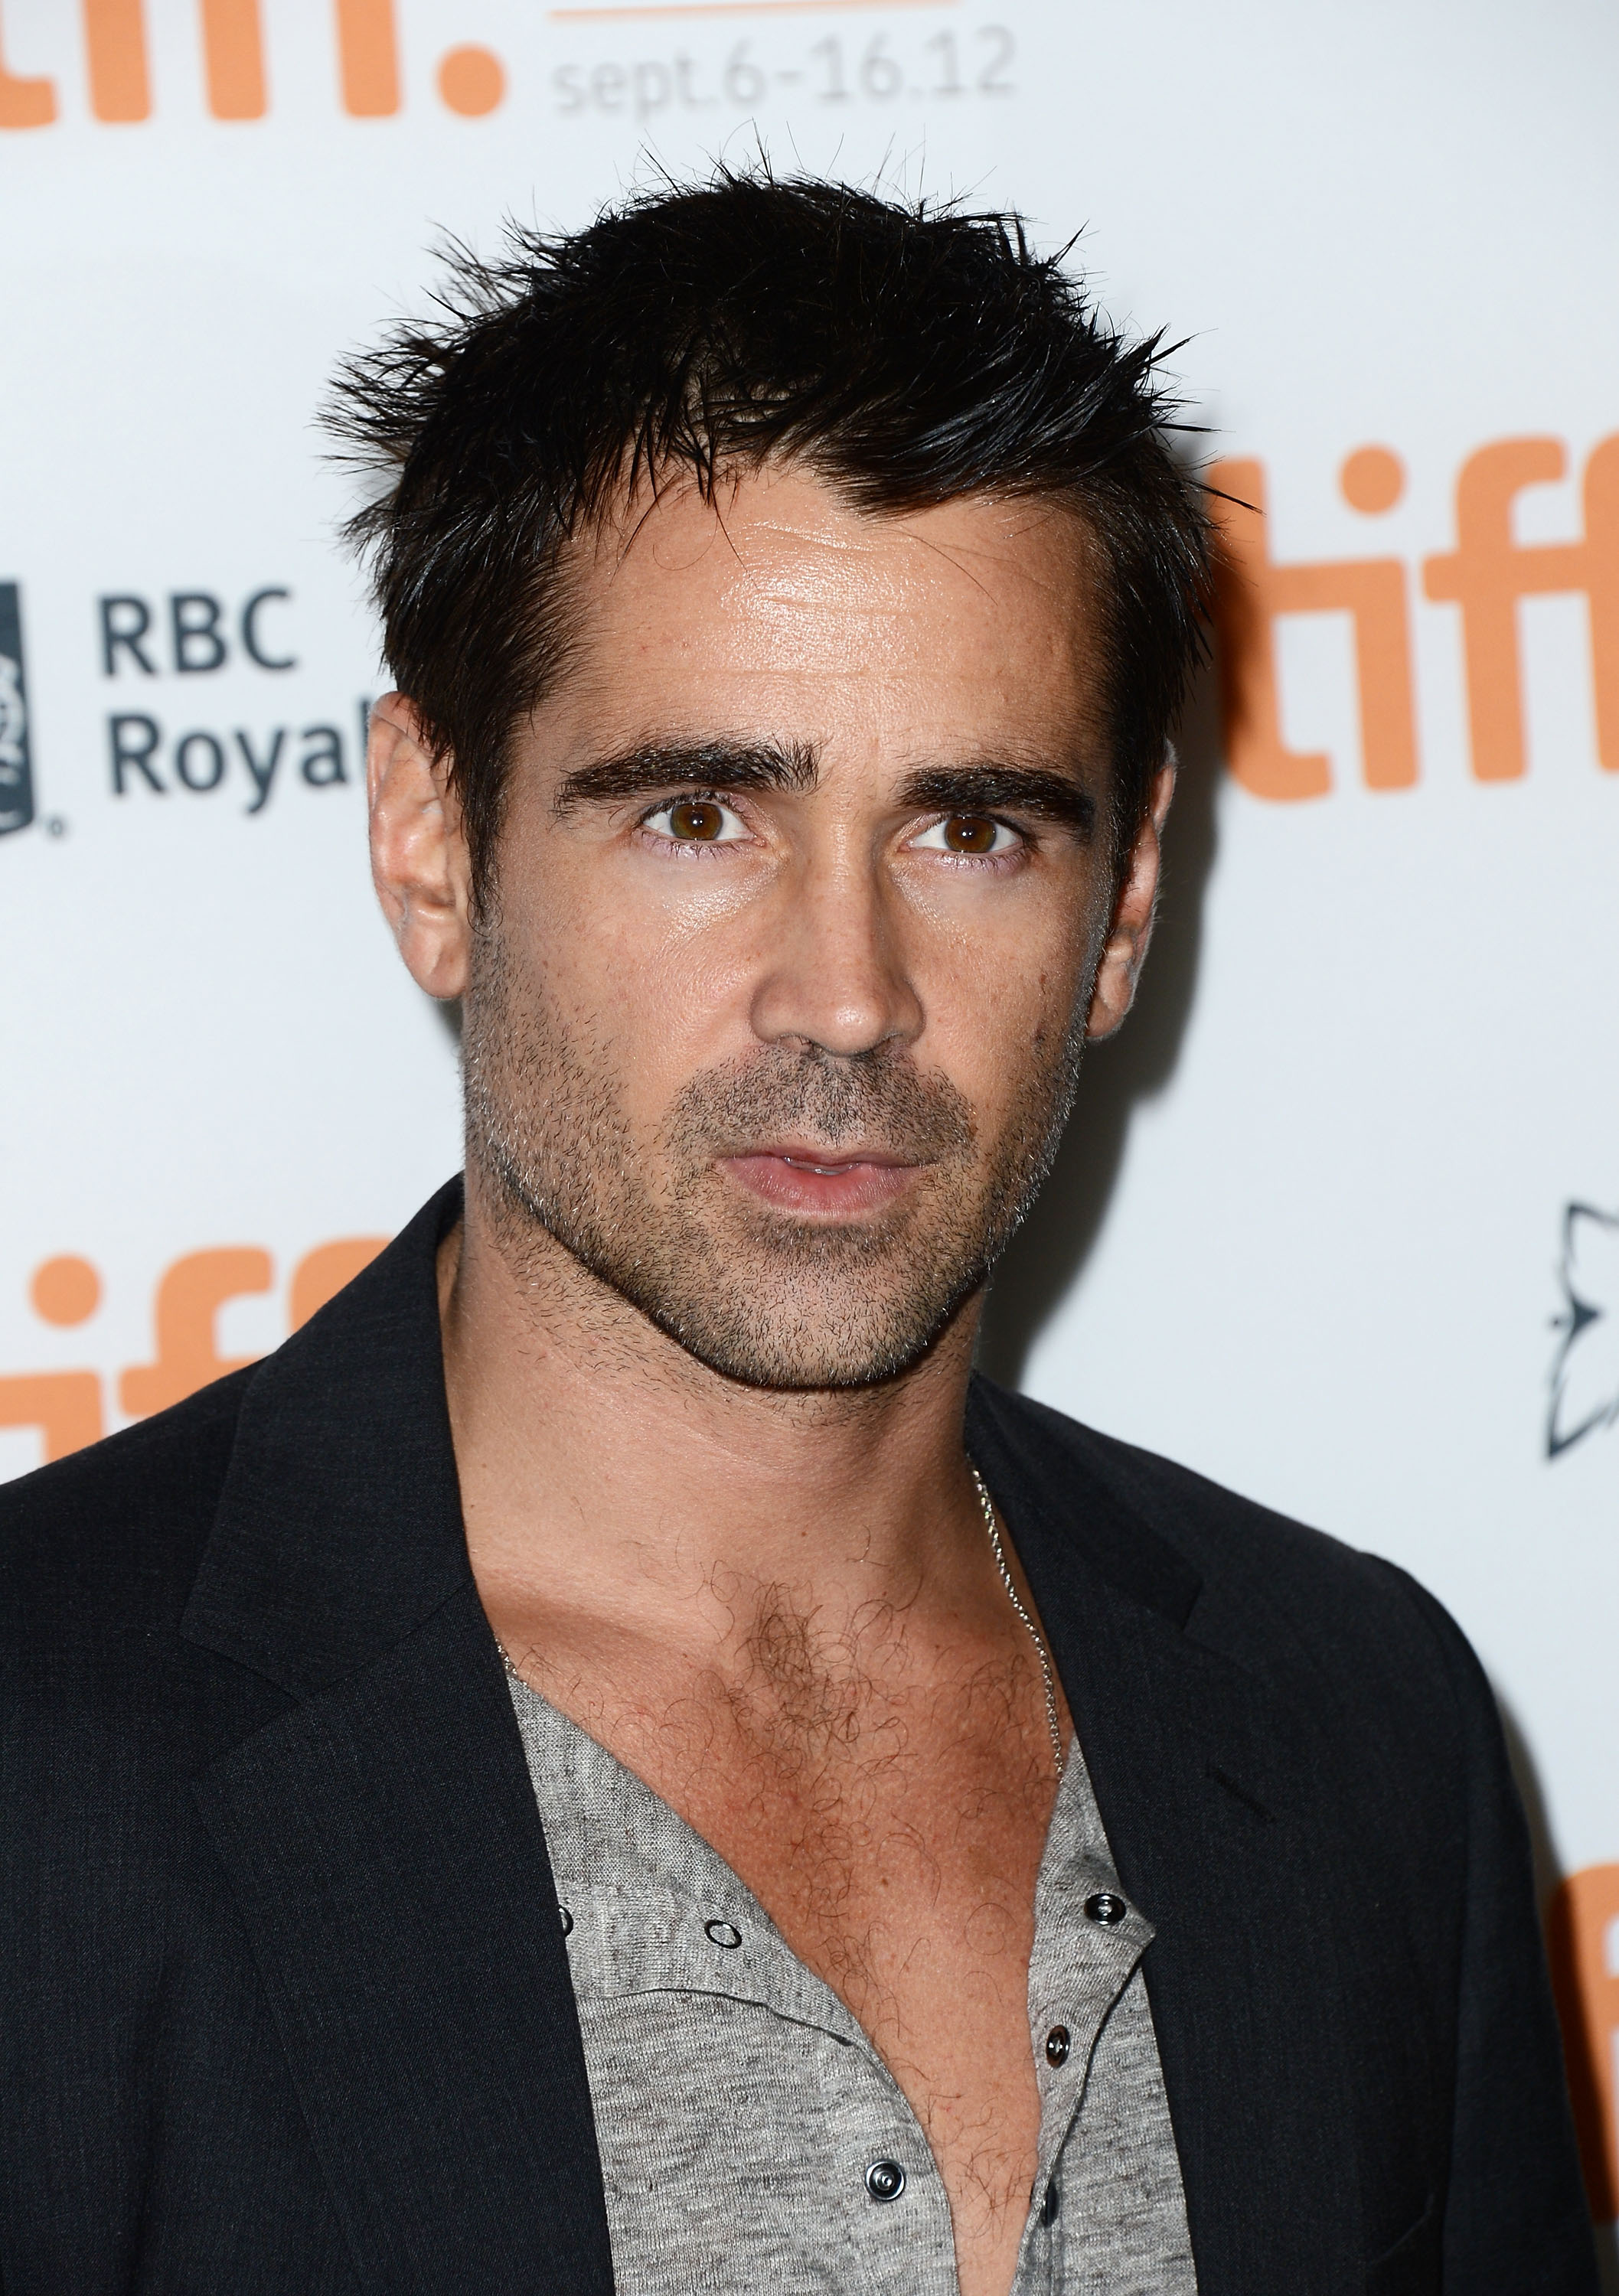 Actor Colin Ferrell attends "Seven Psychopaths" premiere during the 2012 Toronto International Film Festival at Ryerson Theatre on Sept. 7, 2012 in Toronto.